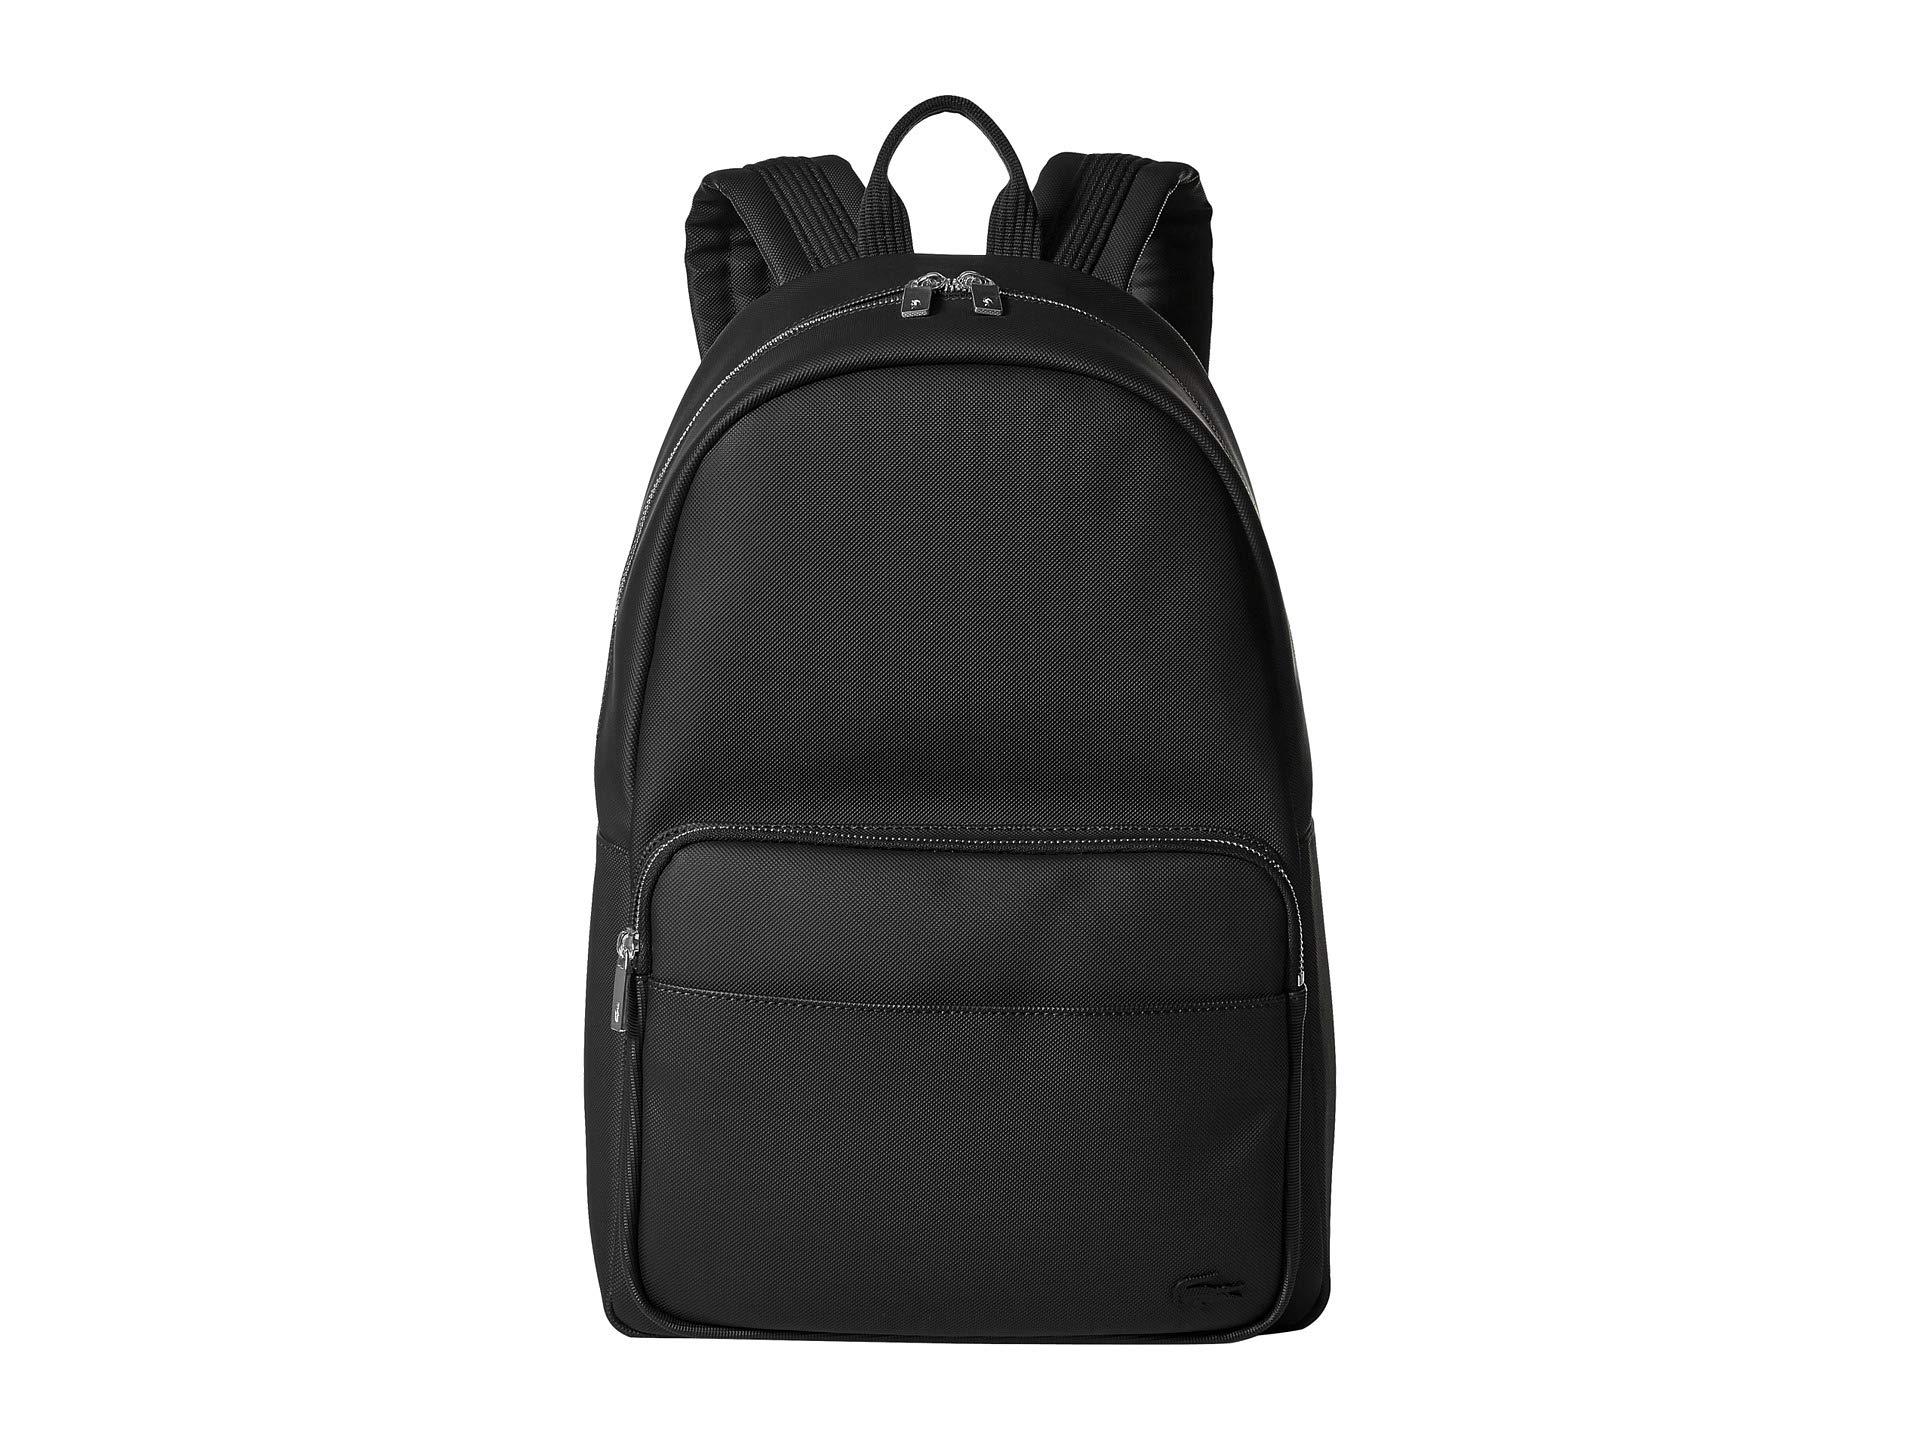 Lacoste Classic Backpack (black) Backpack Bags in Black for Men - Lyst